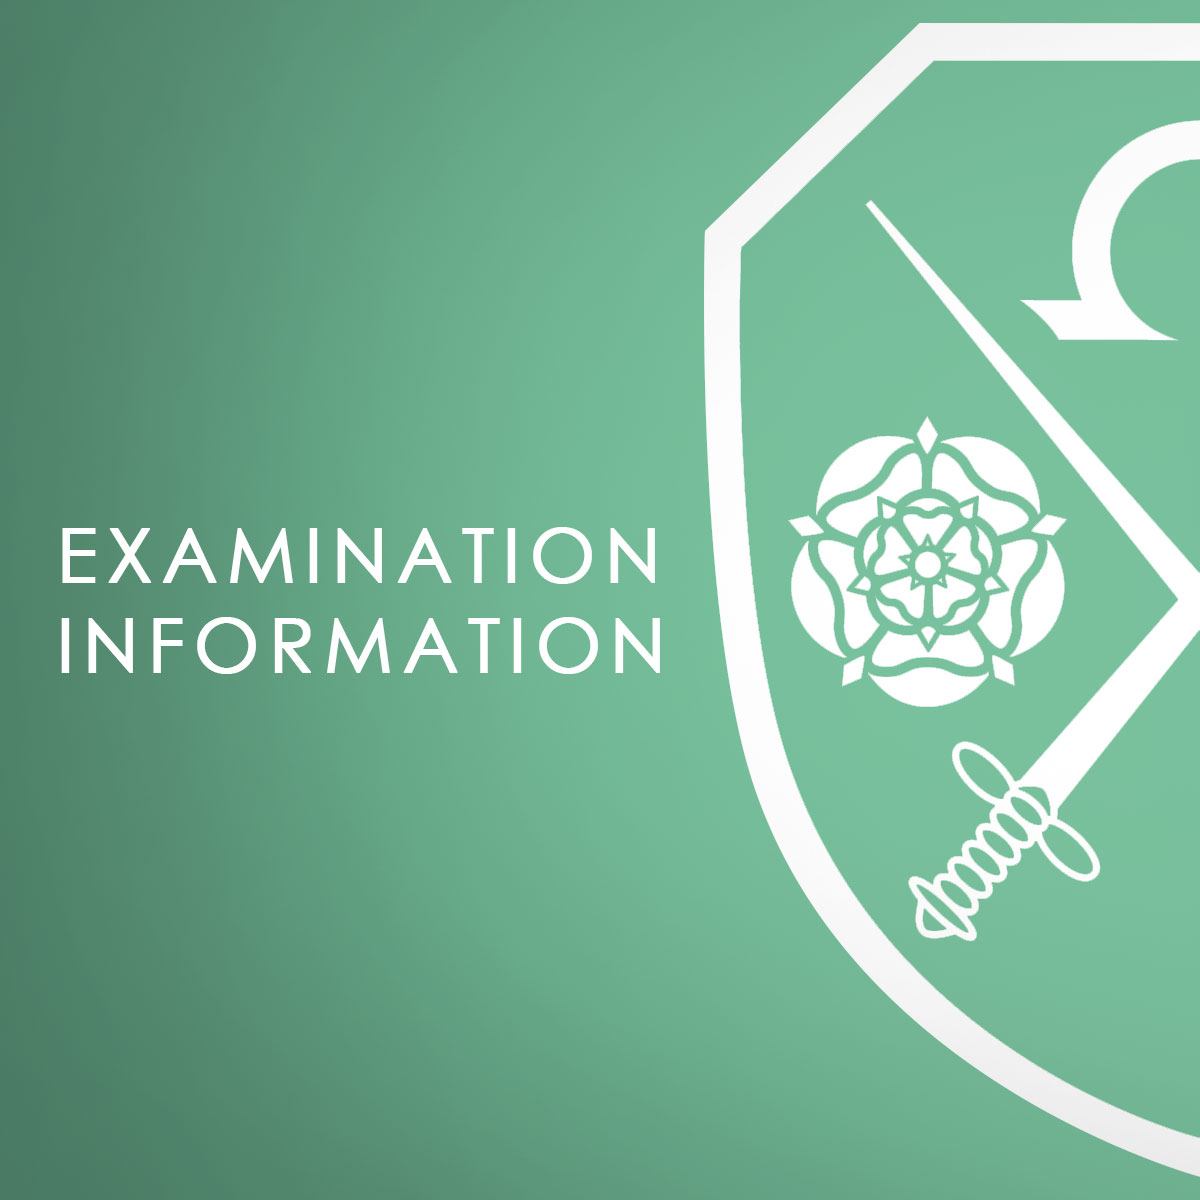 A green background with the East Barnet School logo which says Examination Information